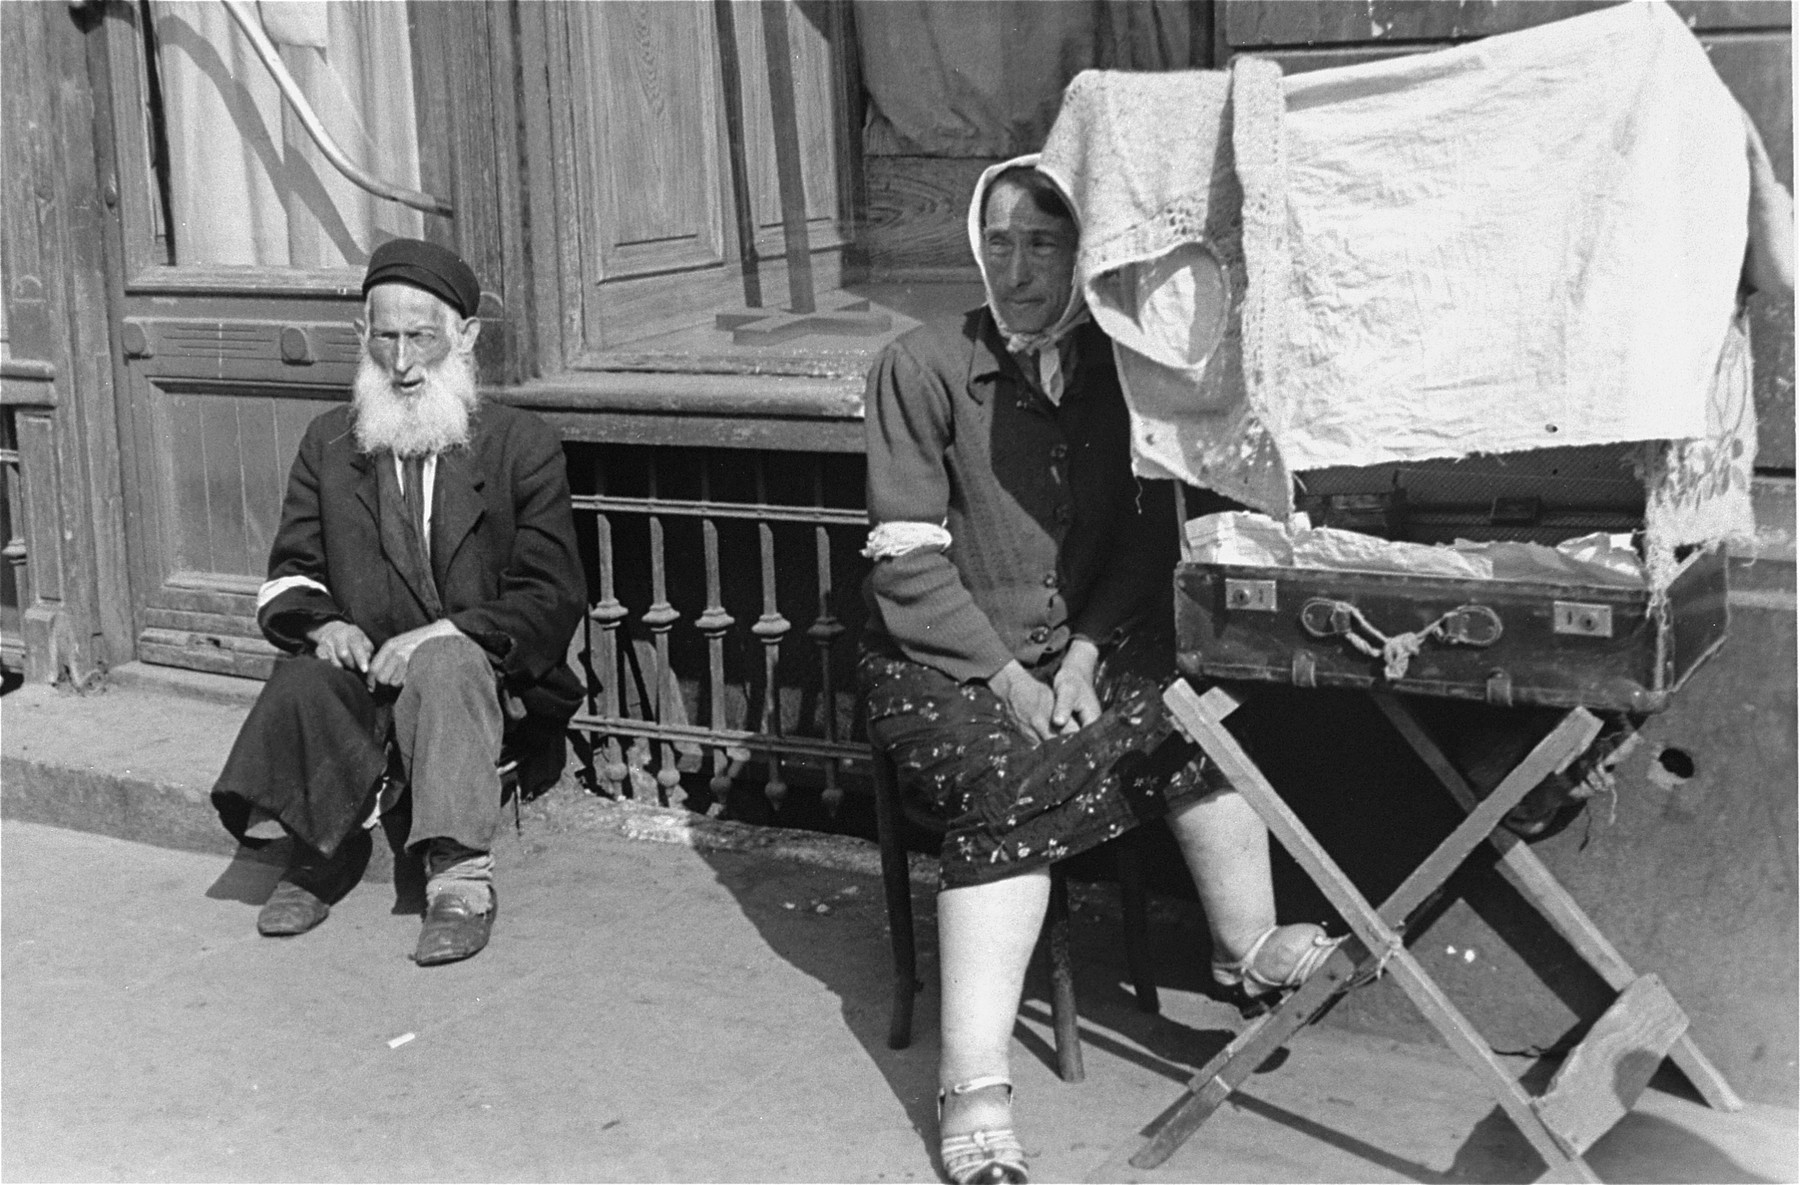 A female vendor sits on a street in the Warsaw ghetto next to an open suitcase containing her wares that has been covered with a dress to provide some shade.

An elderly, bearded man sits nearby.